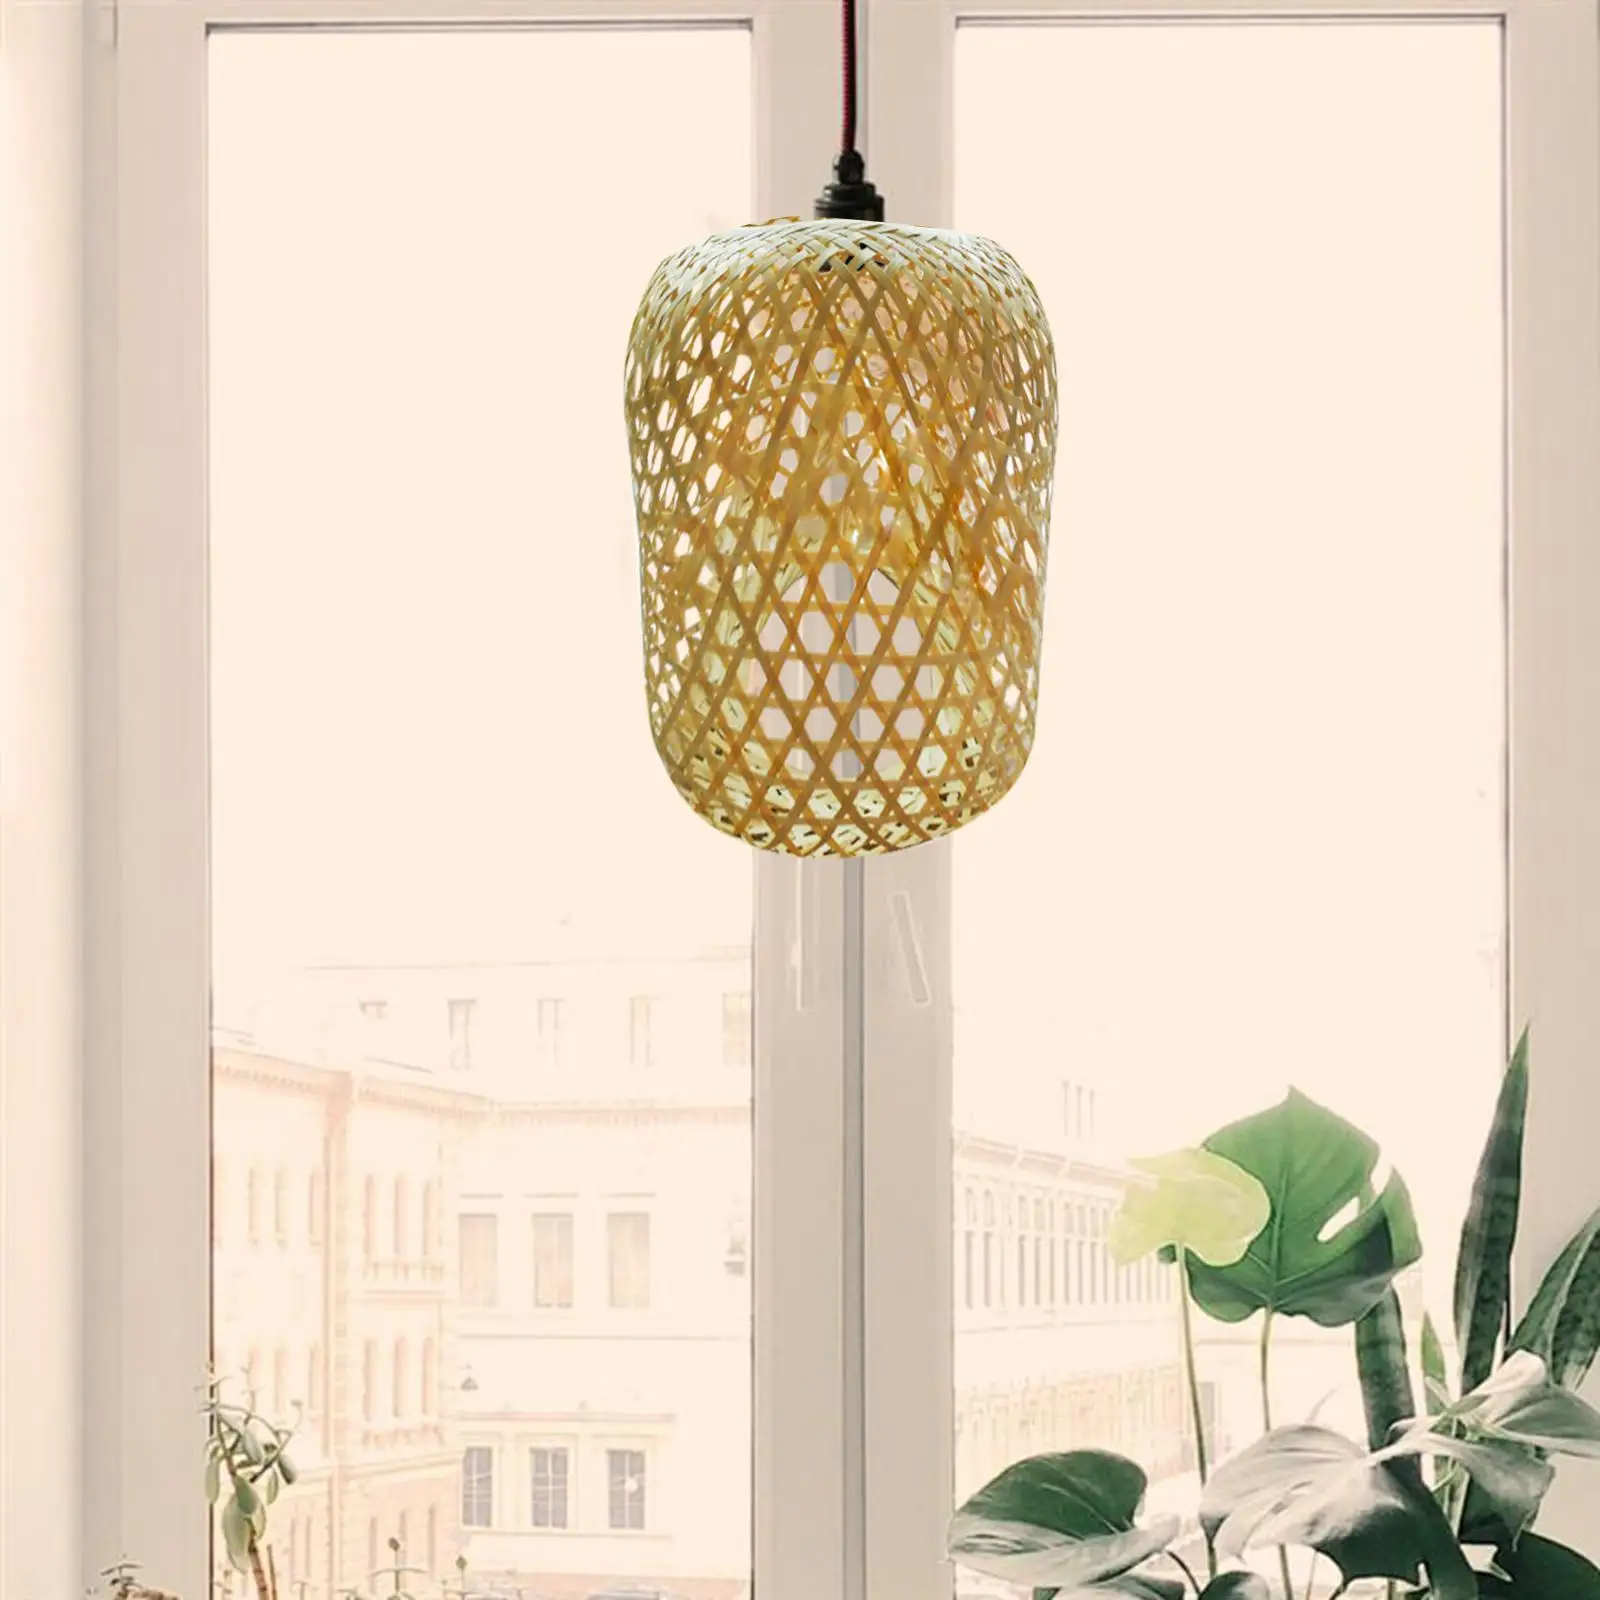 Handmade Weaving Lamp Shade Pendant Light Cover Ornament Hanging Lampshade for Living Room Tea House Dining Room Decor